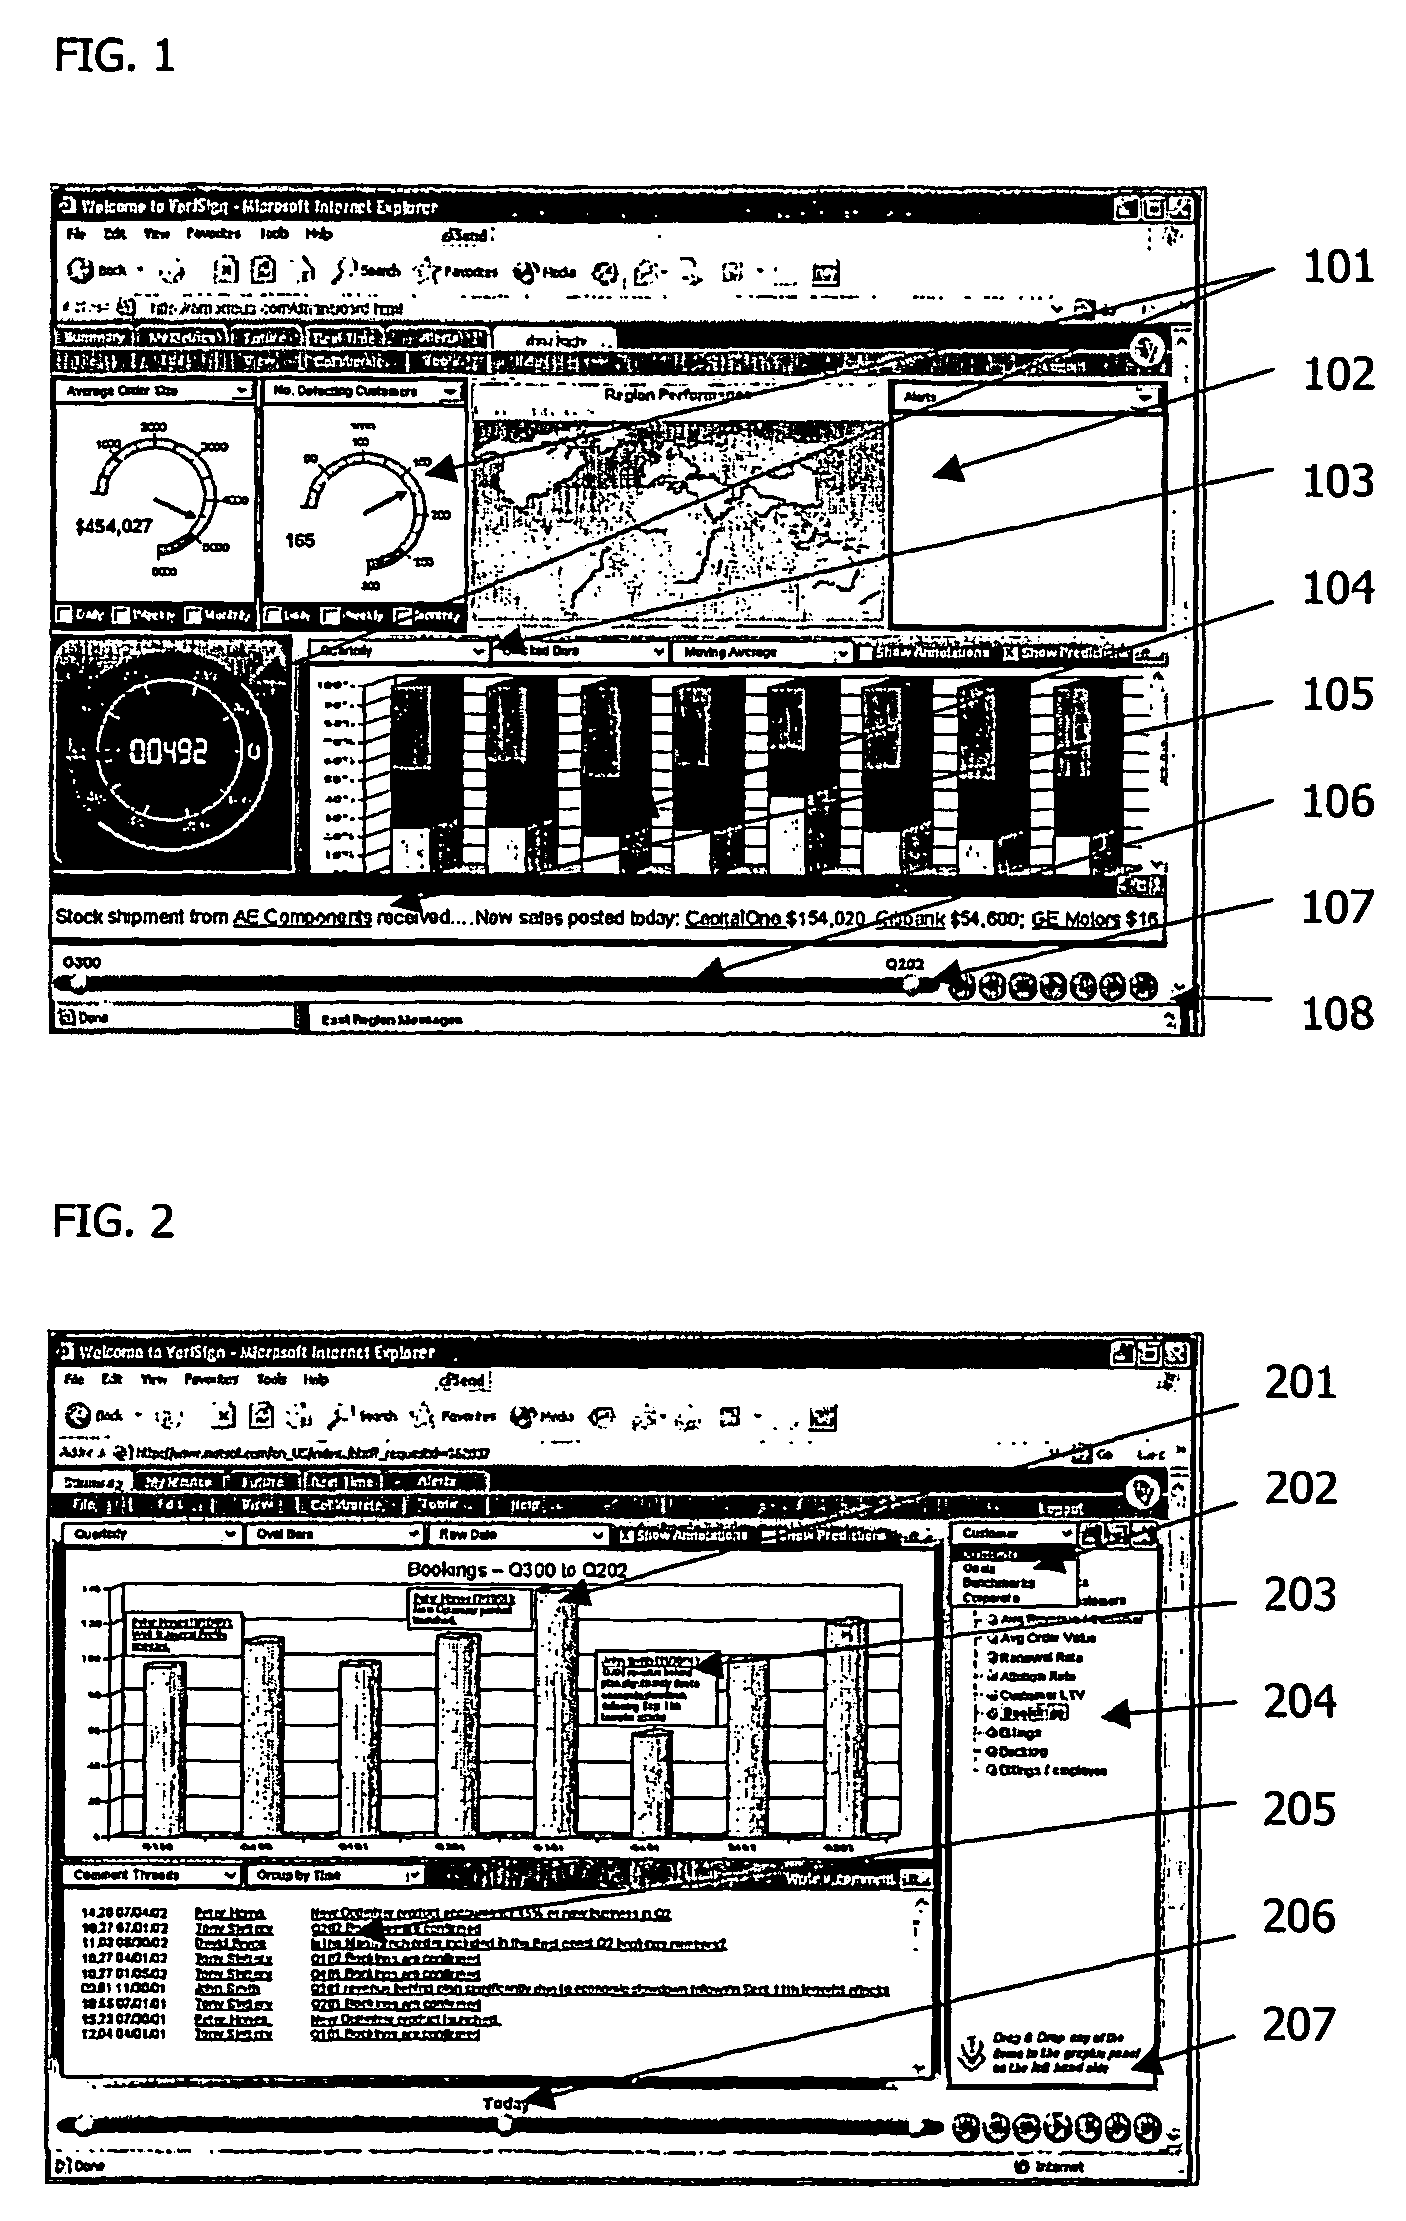 Computer system and method for business data processing